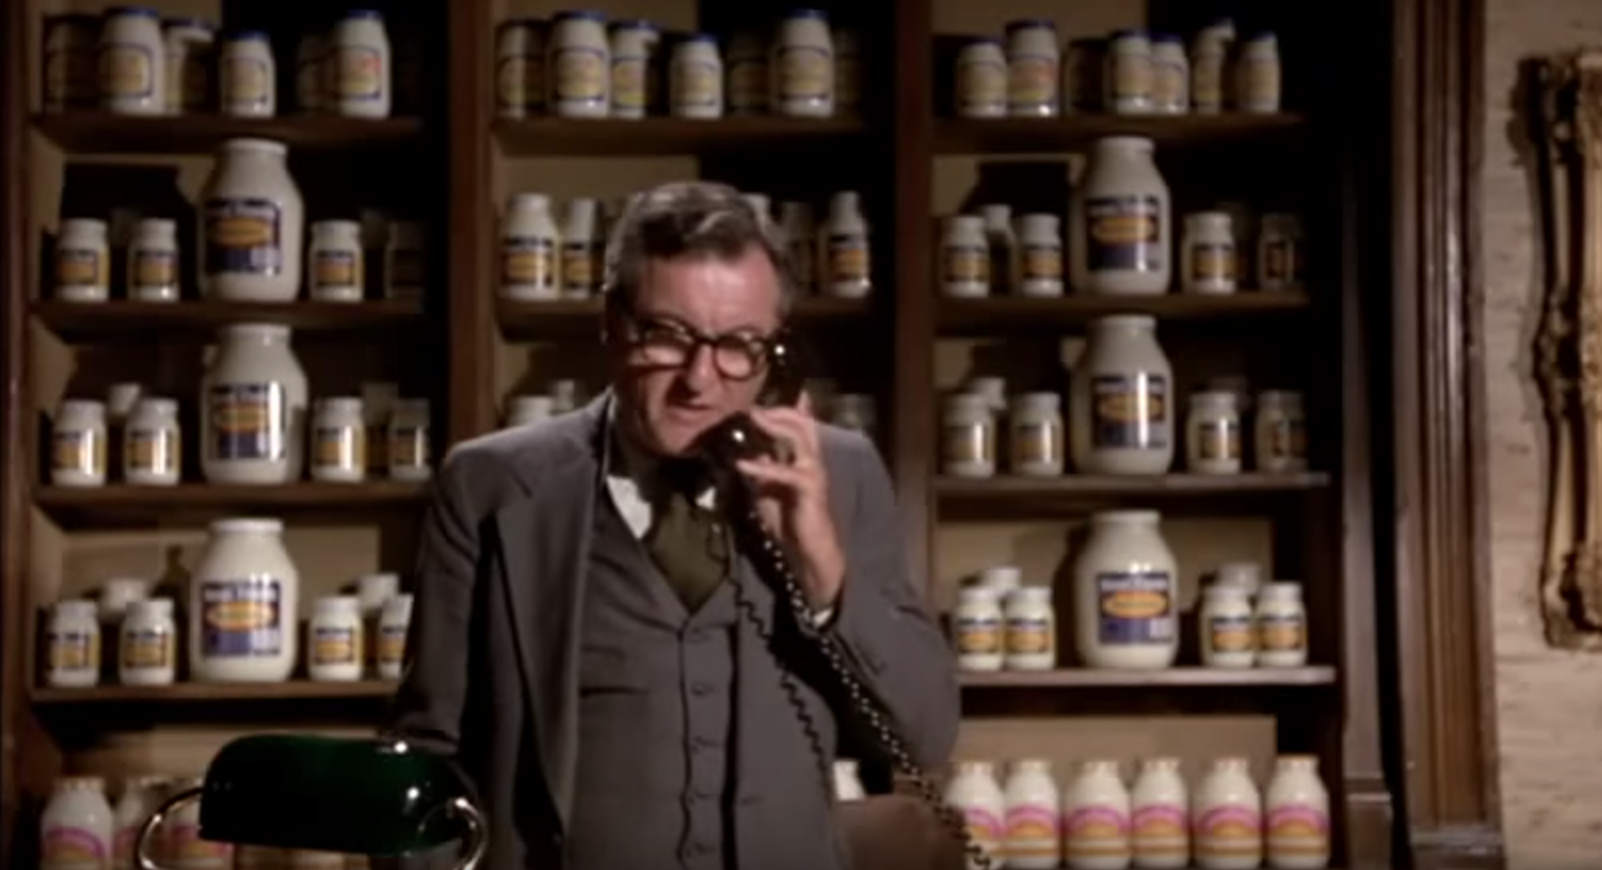 In Airplane! the movie, just noticed that the doctor calling from the Mayo clinic has hundreds of jars of mayonaise behind his desk.